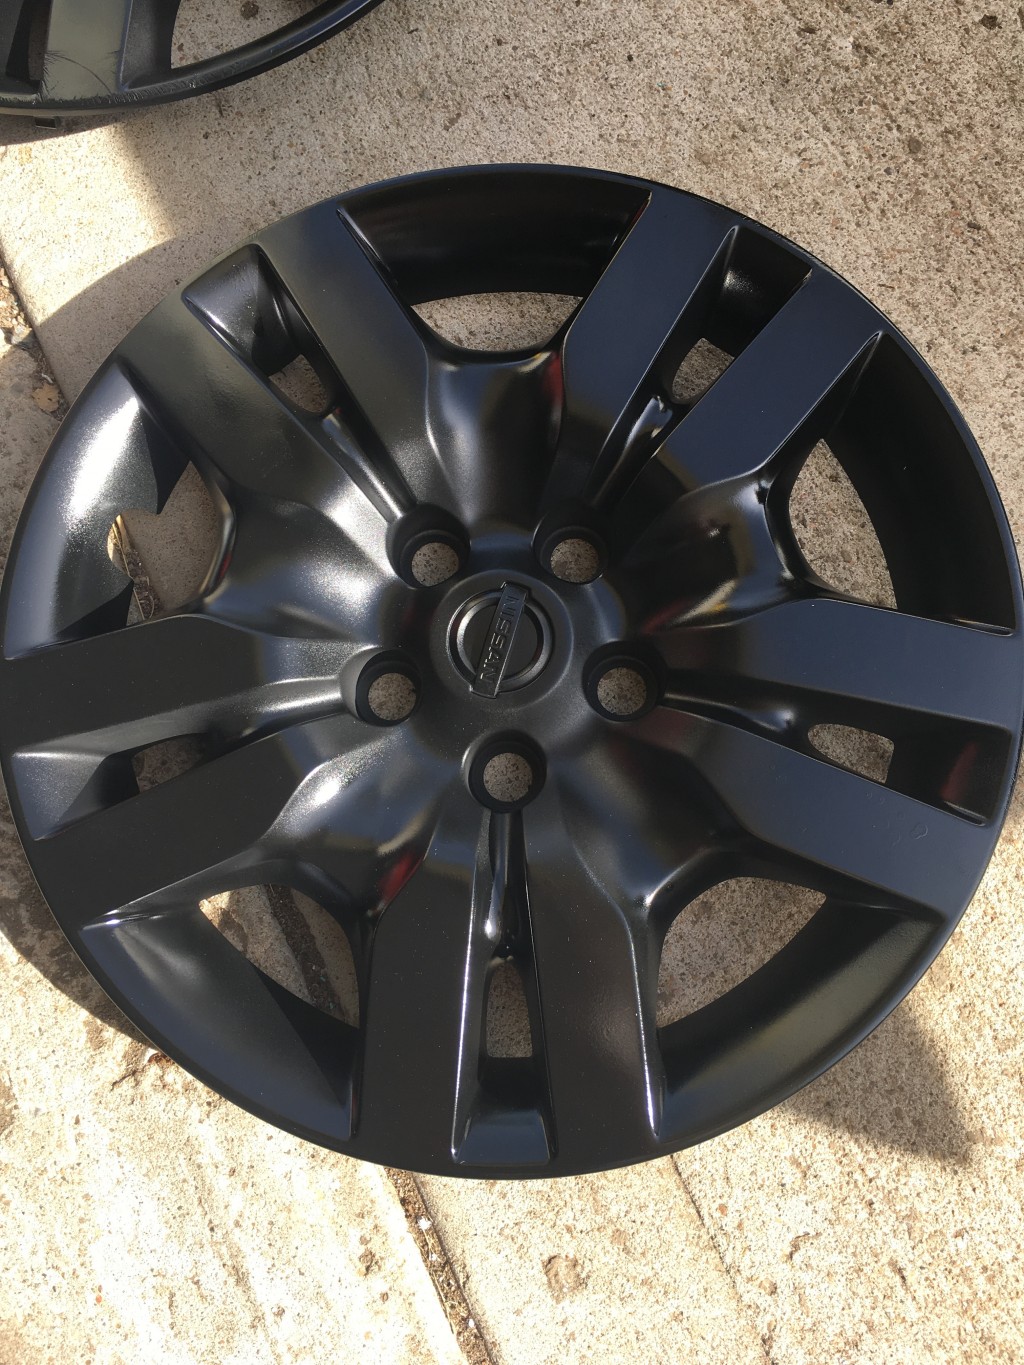 How to Paint Hubcaps Step by Step (With Pictures)